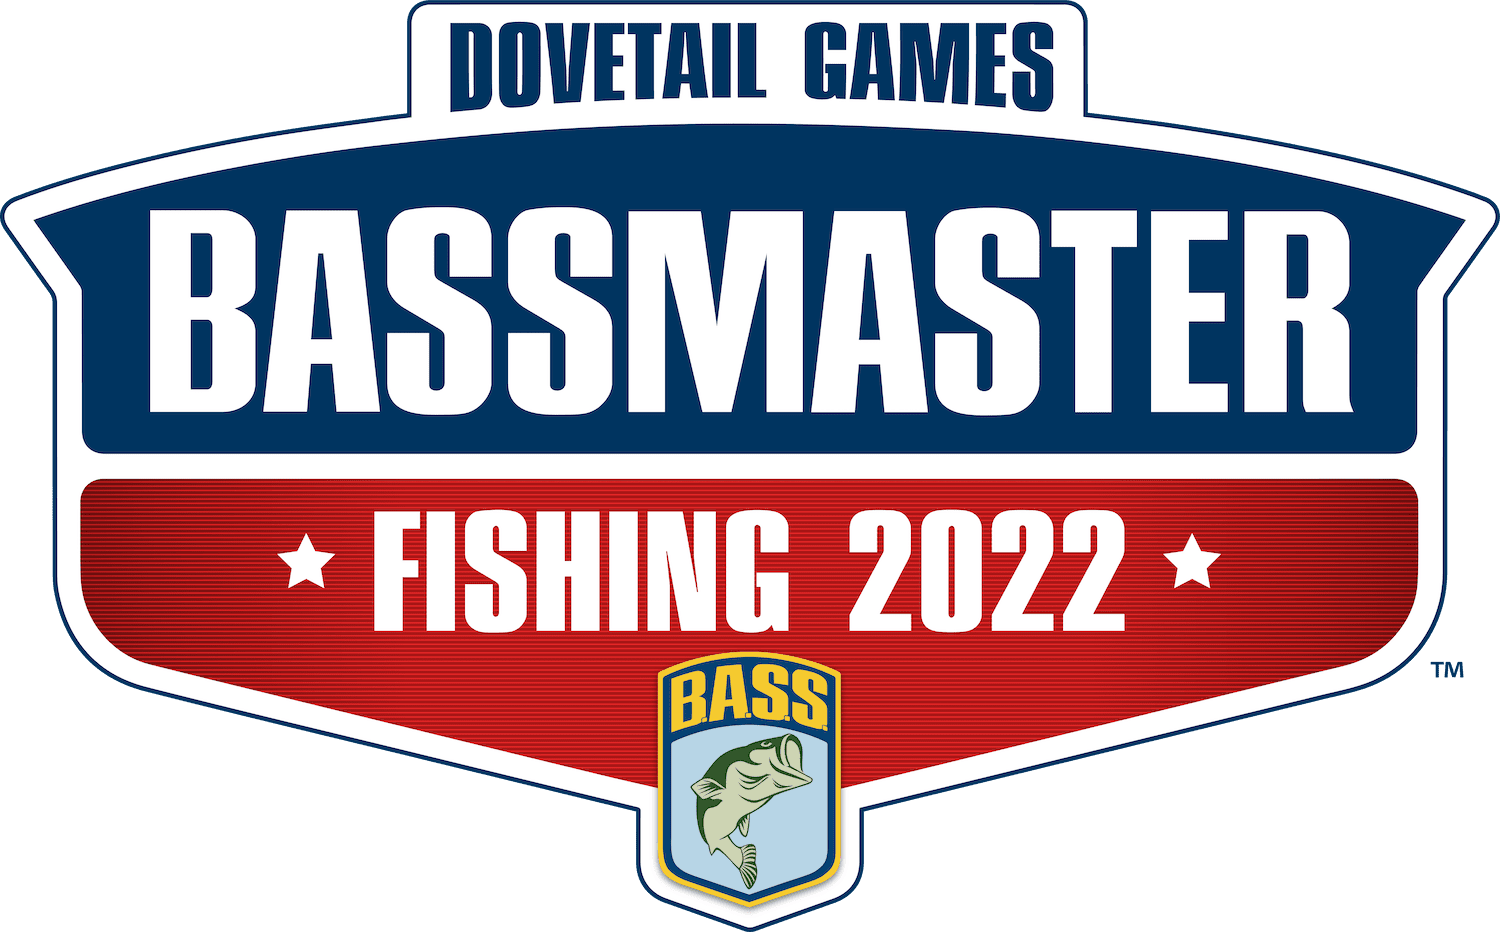 Meet The Bassmaster Fishing 2022 Developers In New Video Q&A